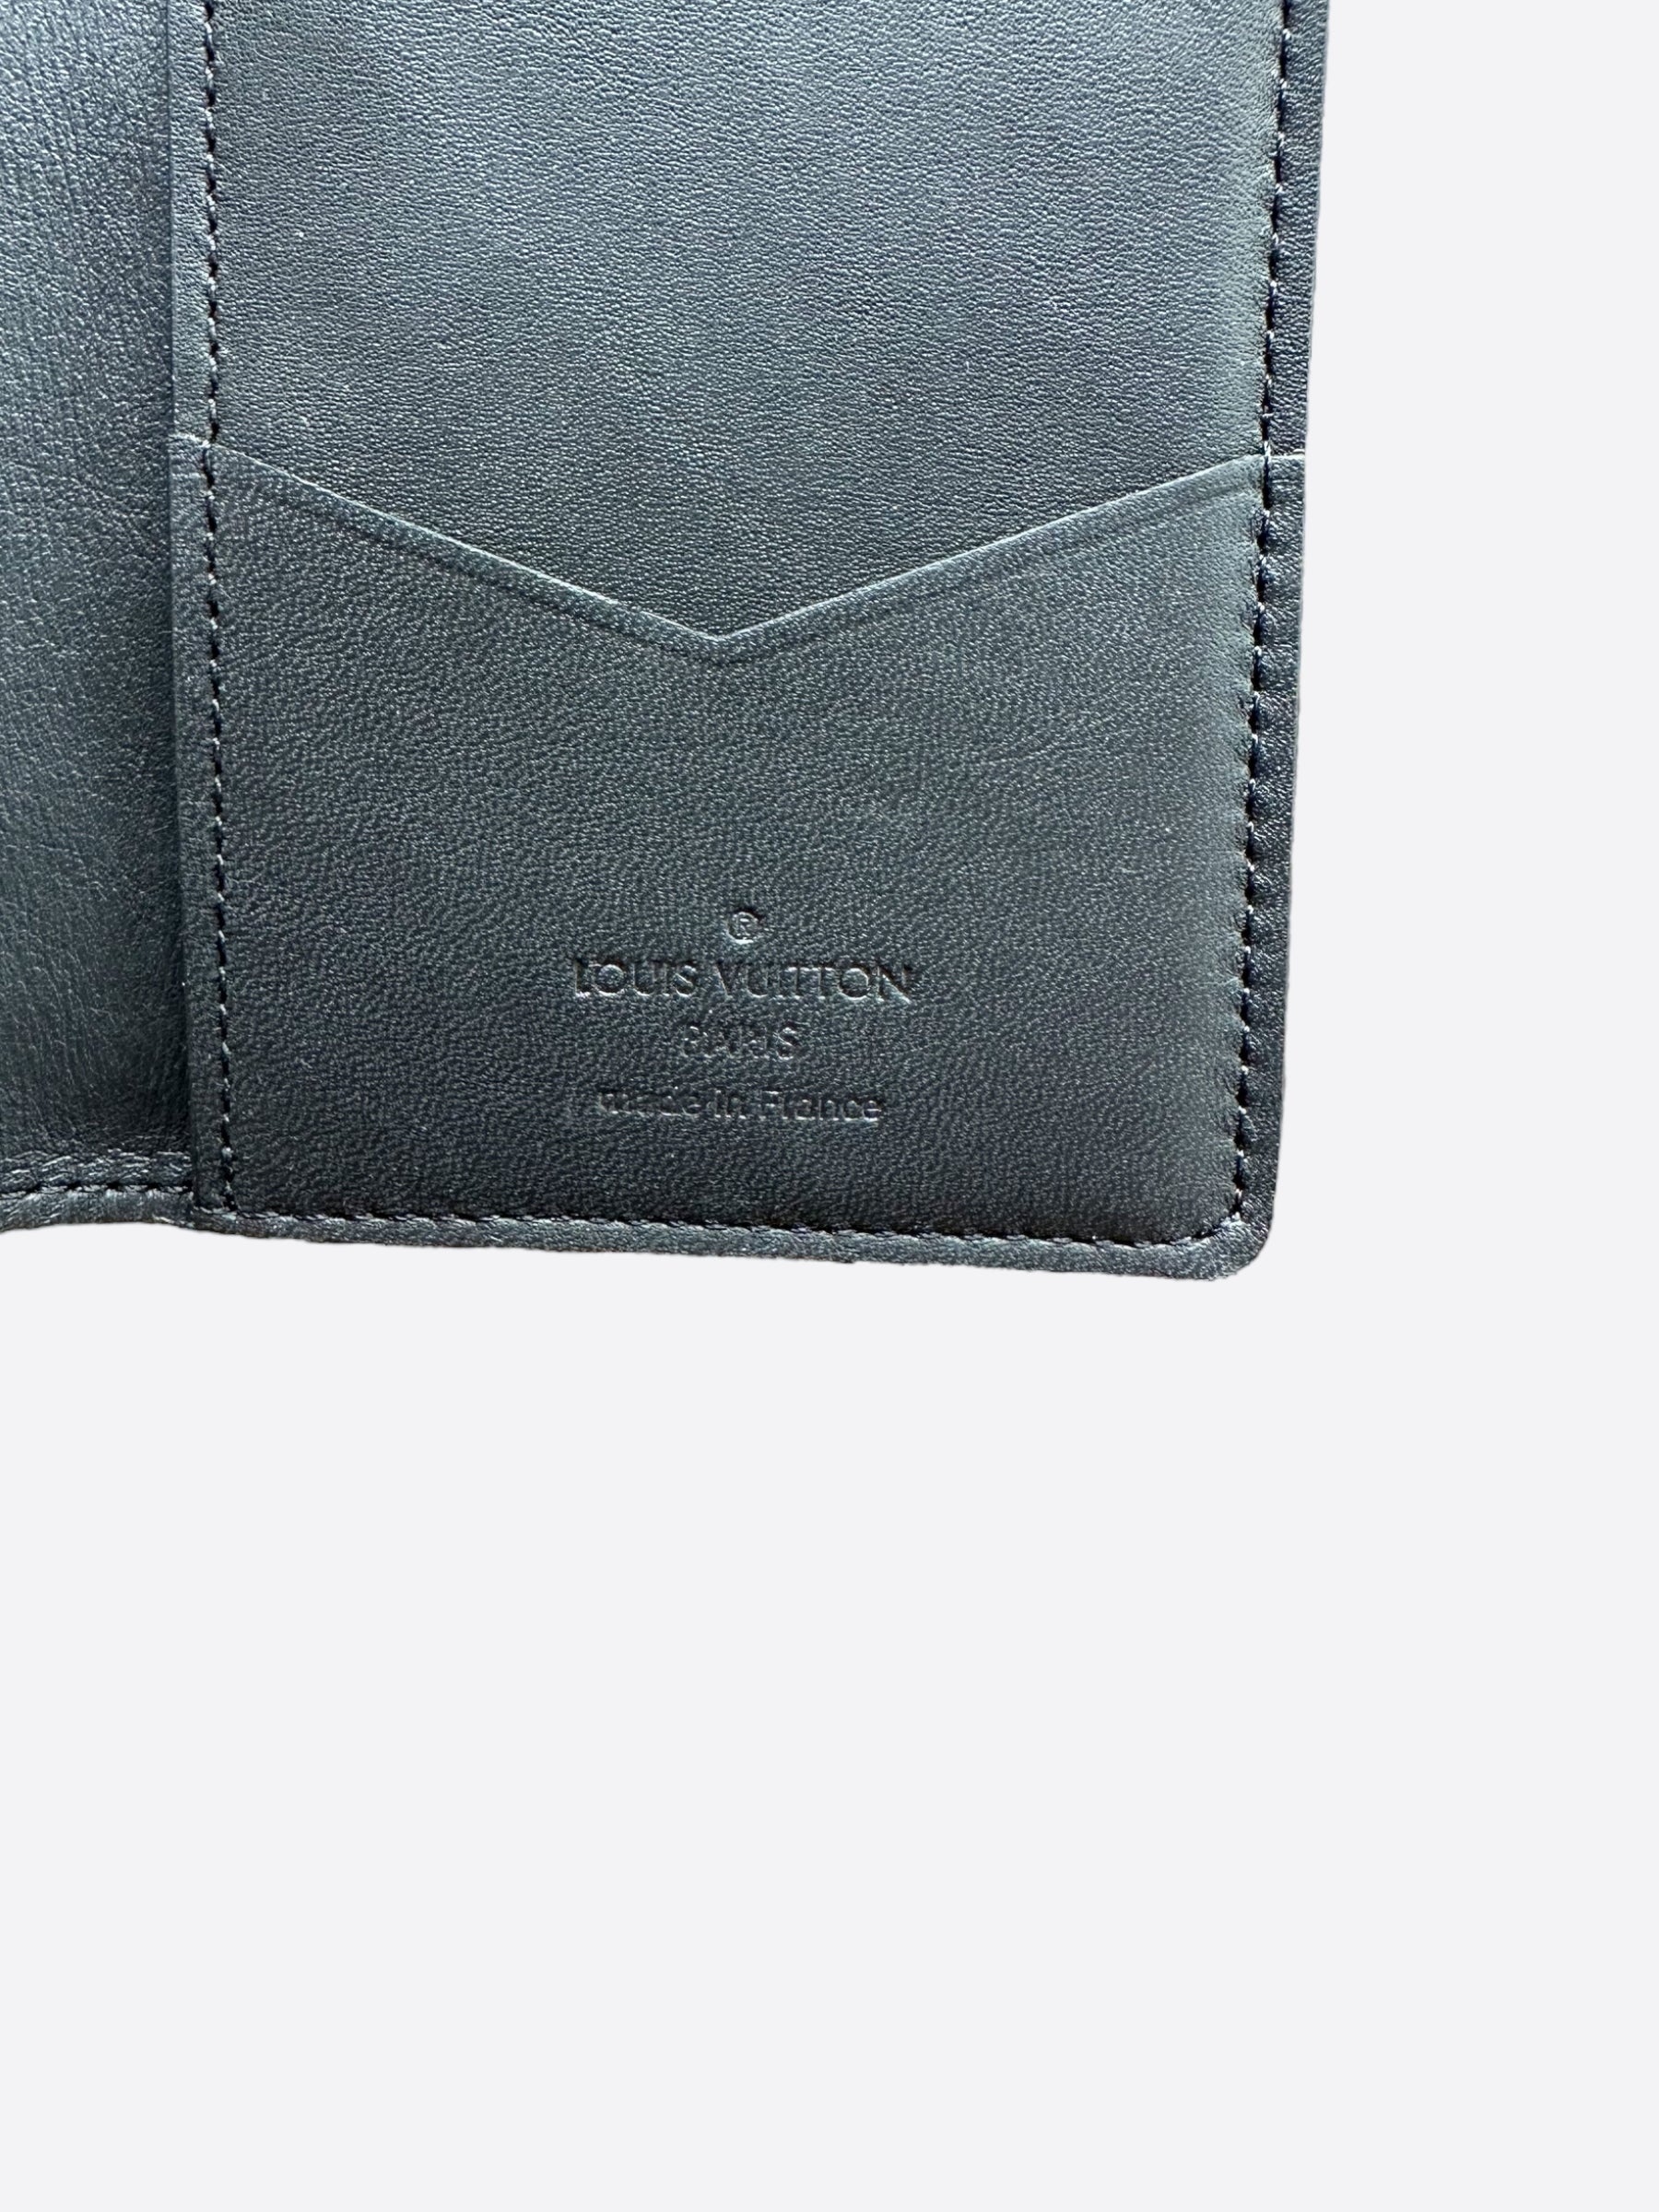 Pocket Organiser Monogram Eclipse - Wallets and Small Leather